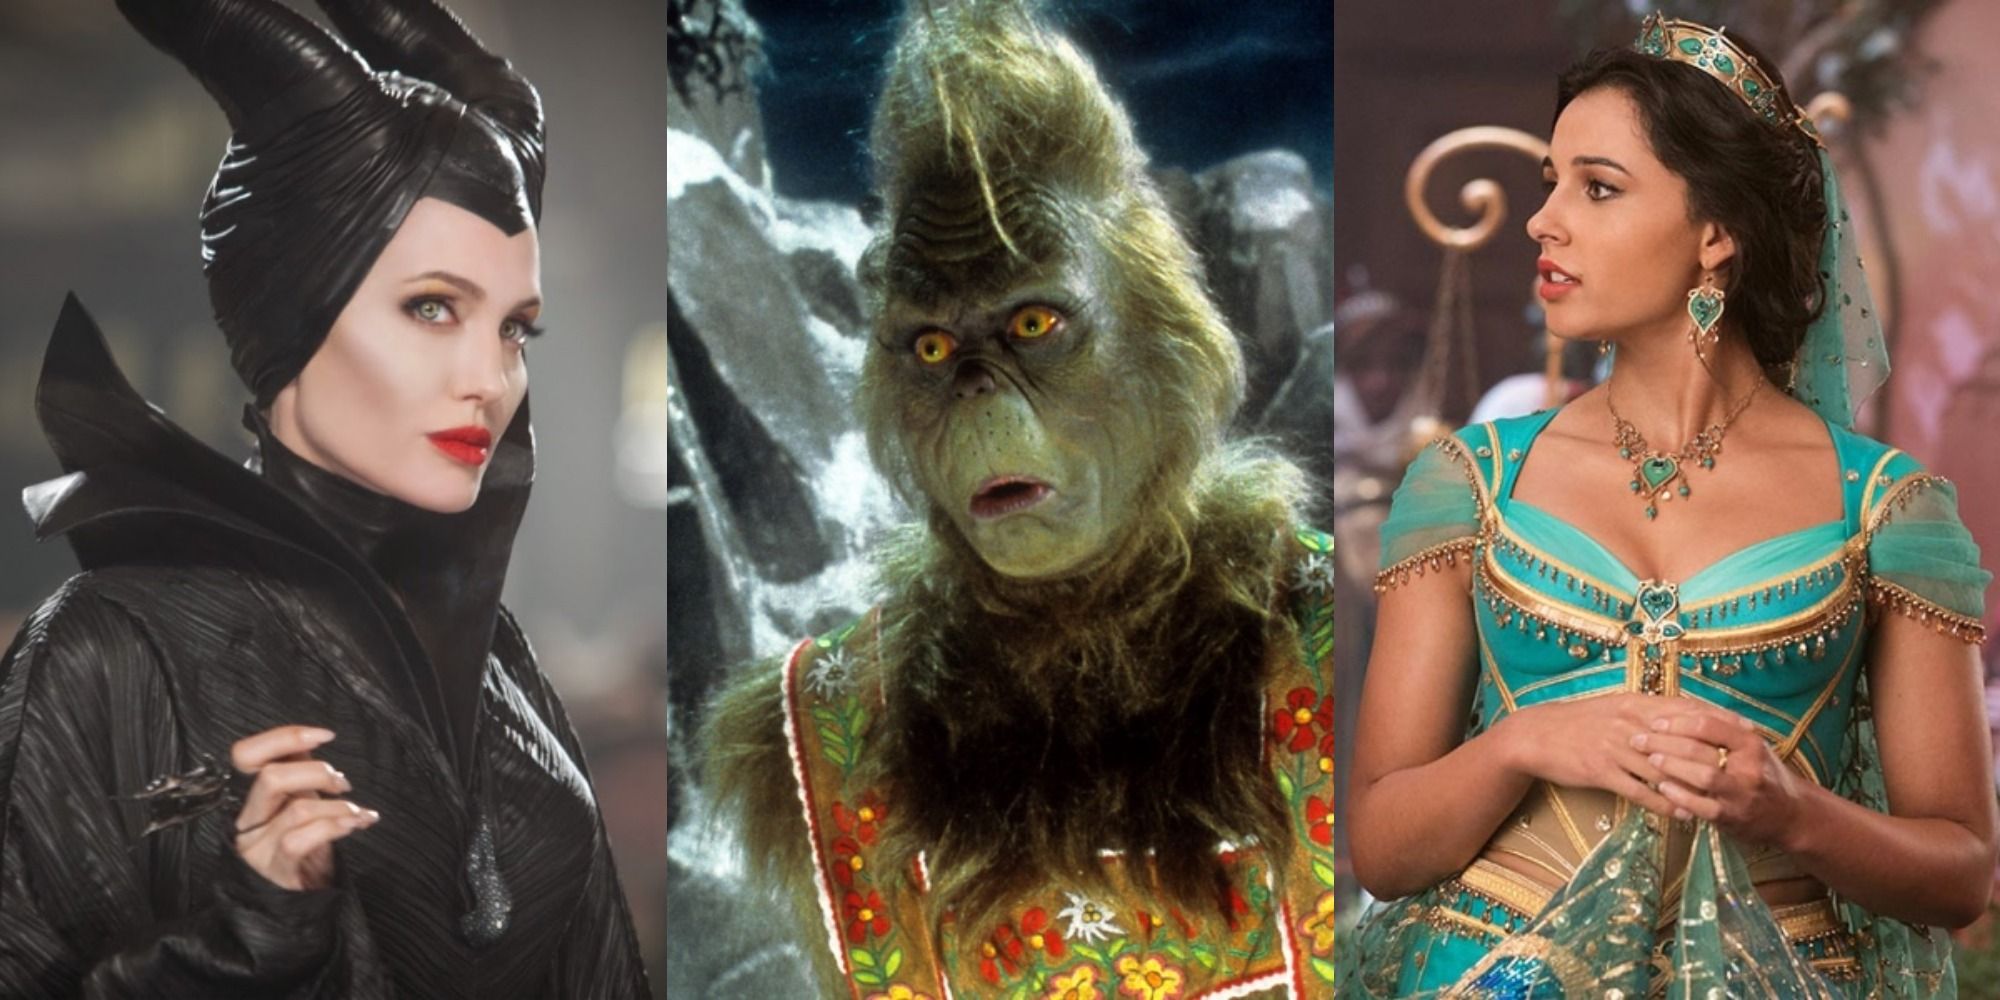 Split image of Maleficent, The Grinch, and Jasmine